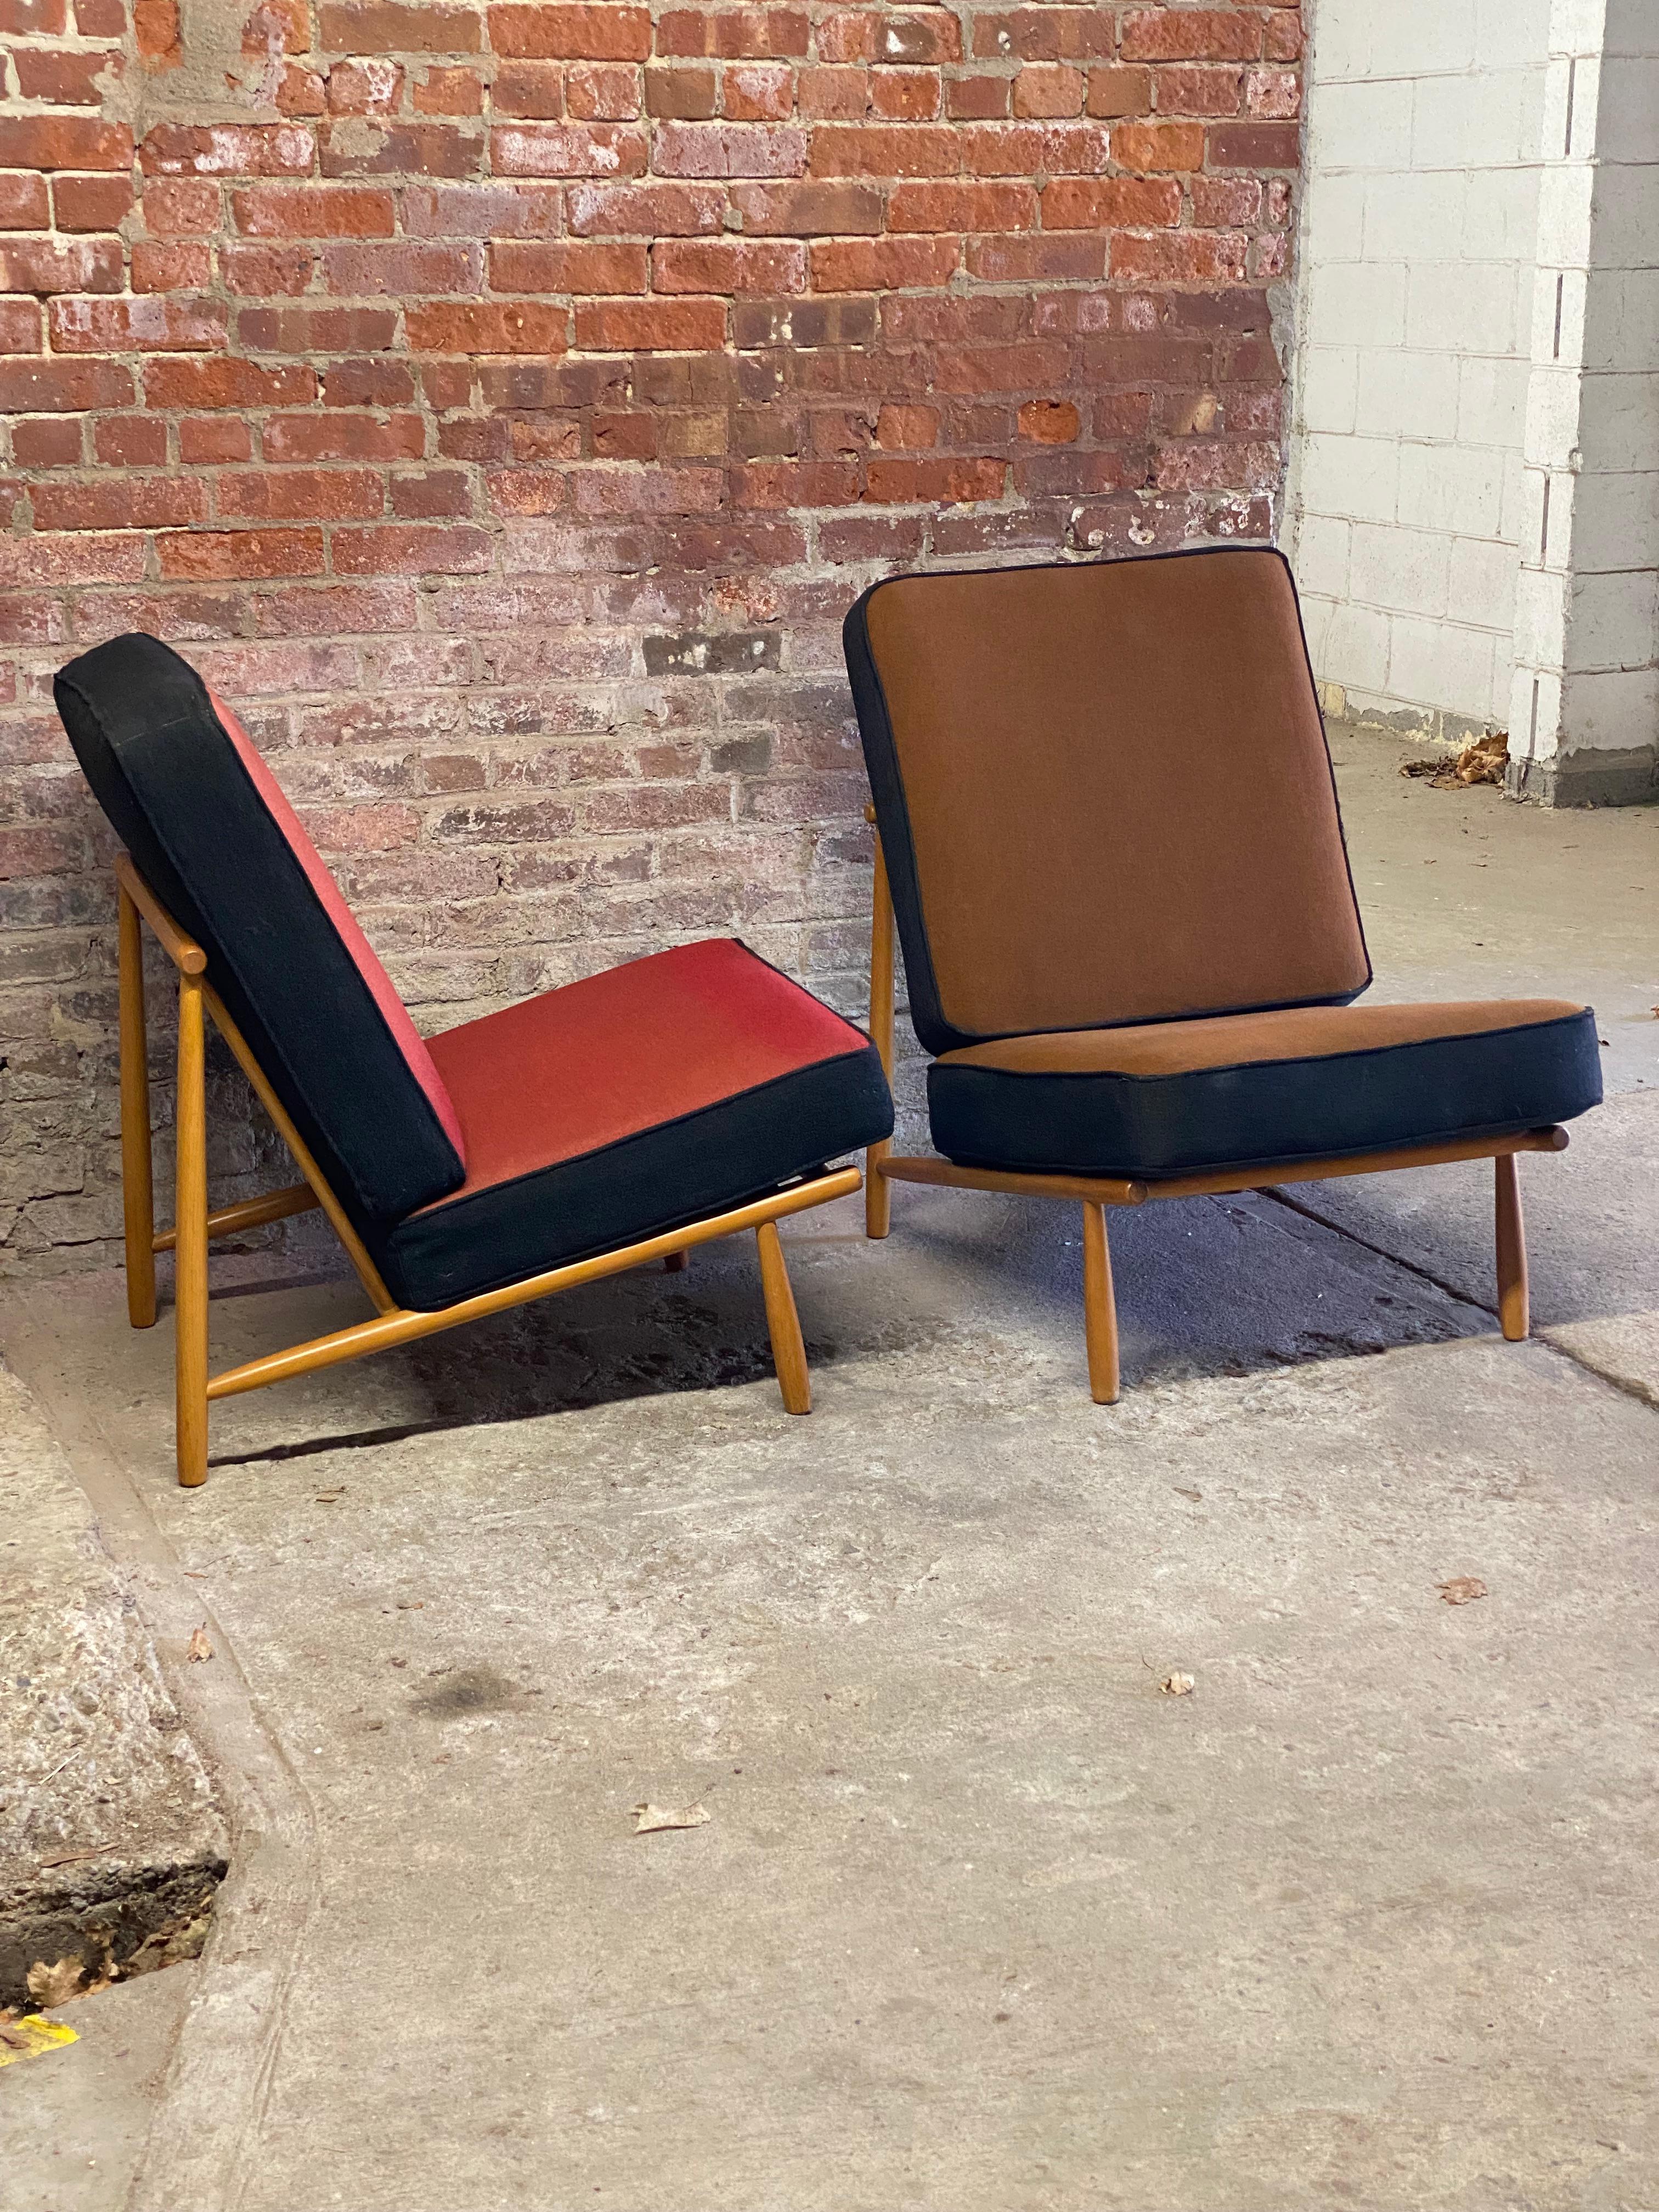 Pair of Alf Svensson for DUX Domus 1 easy chairs. Solid beech dowel legs with spindle backs. Both are signed with DUX metal tag. Beautiful profile. Heavy duty wool fabric cushions in red and brown with black edging. Circa 1960. Good original finish